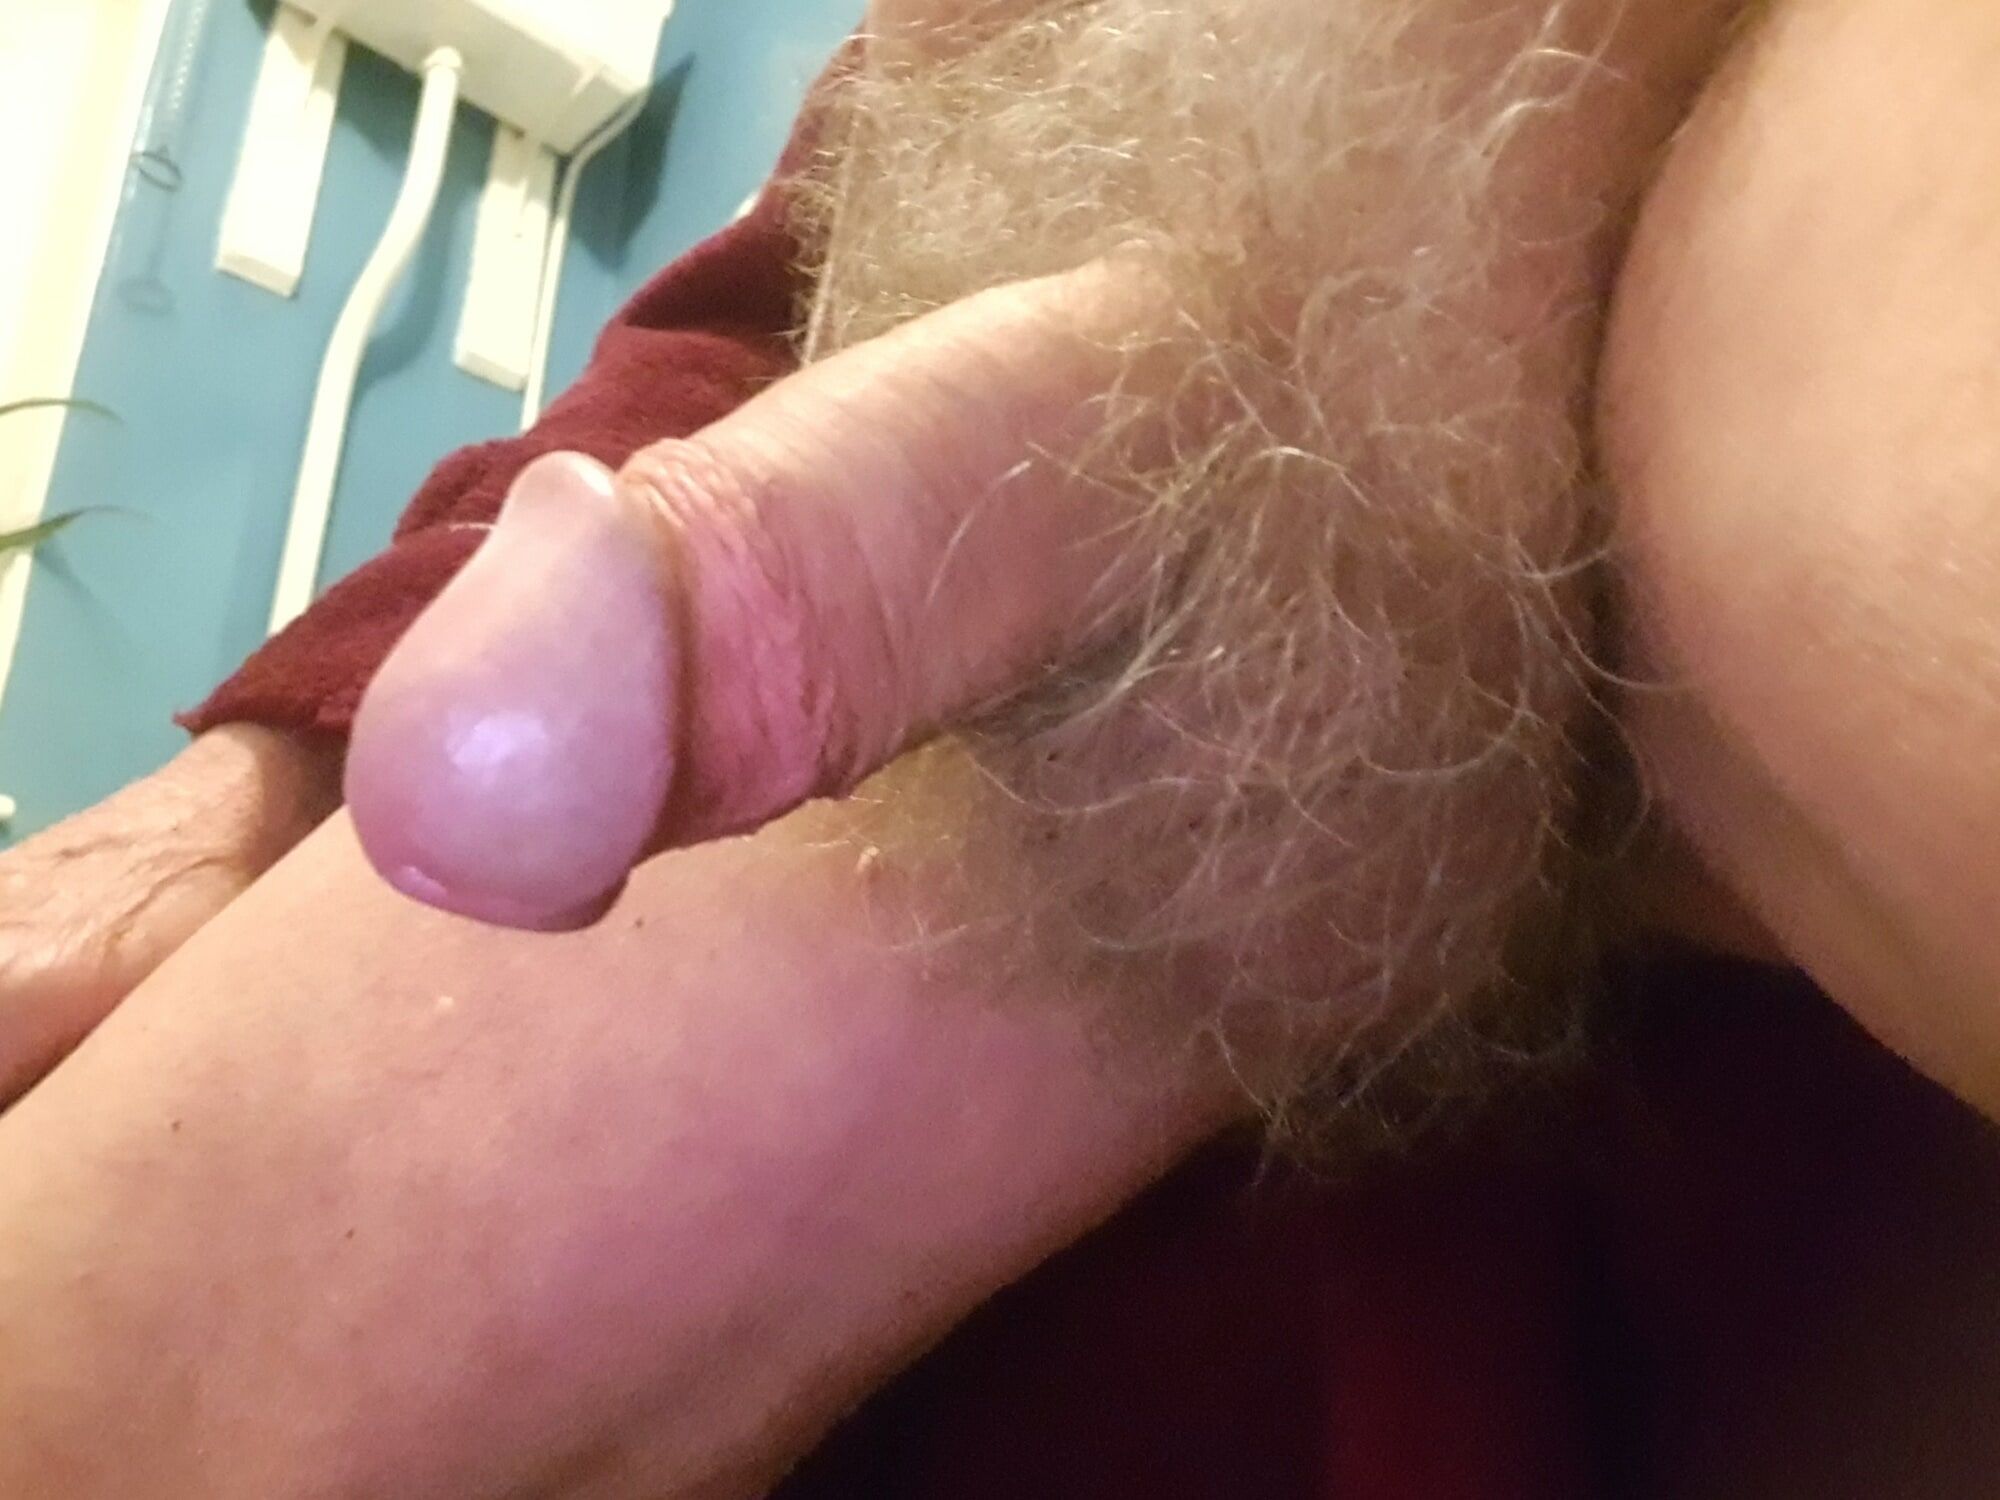 Just cock #7